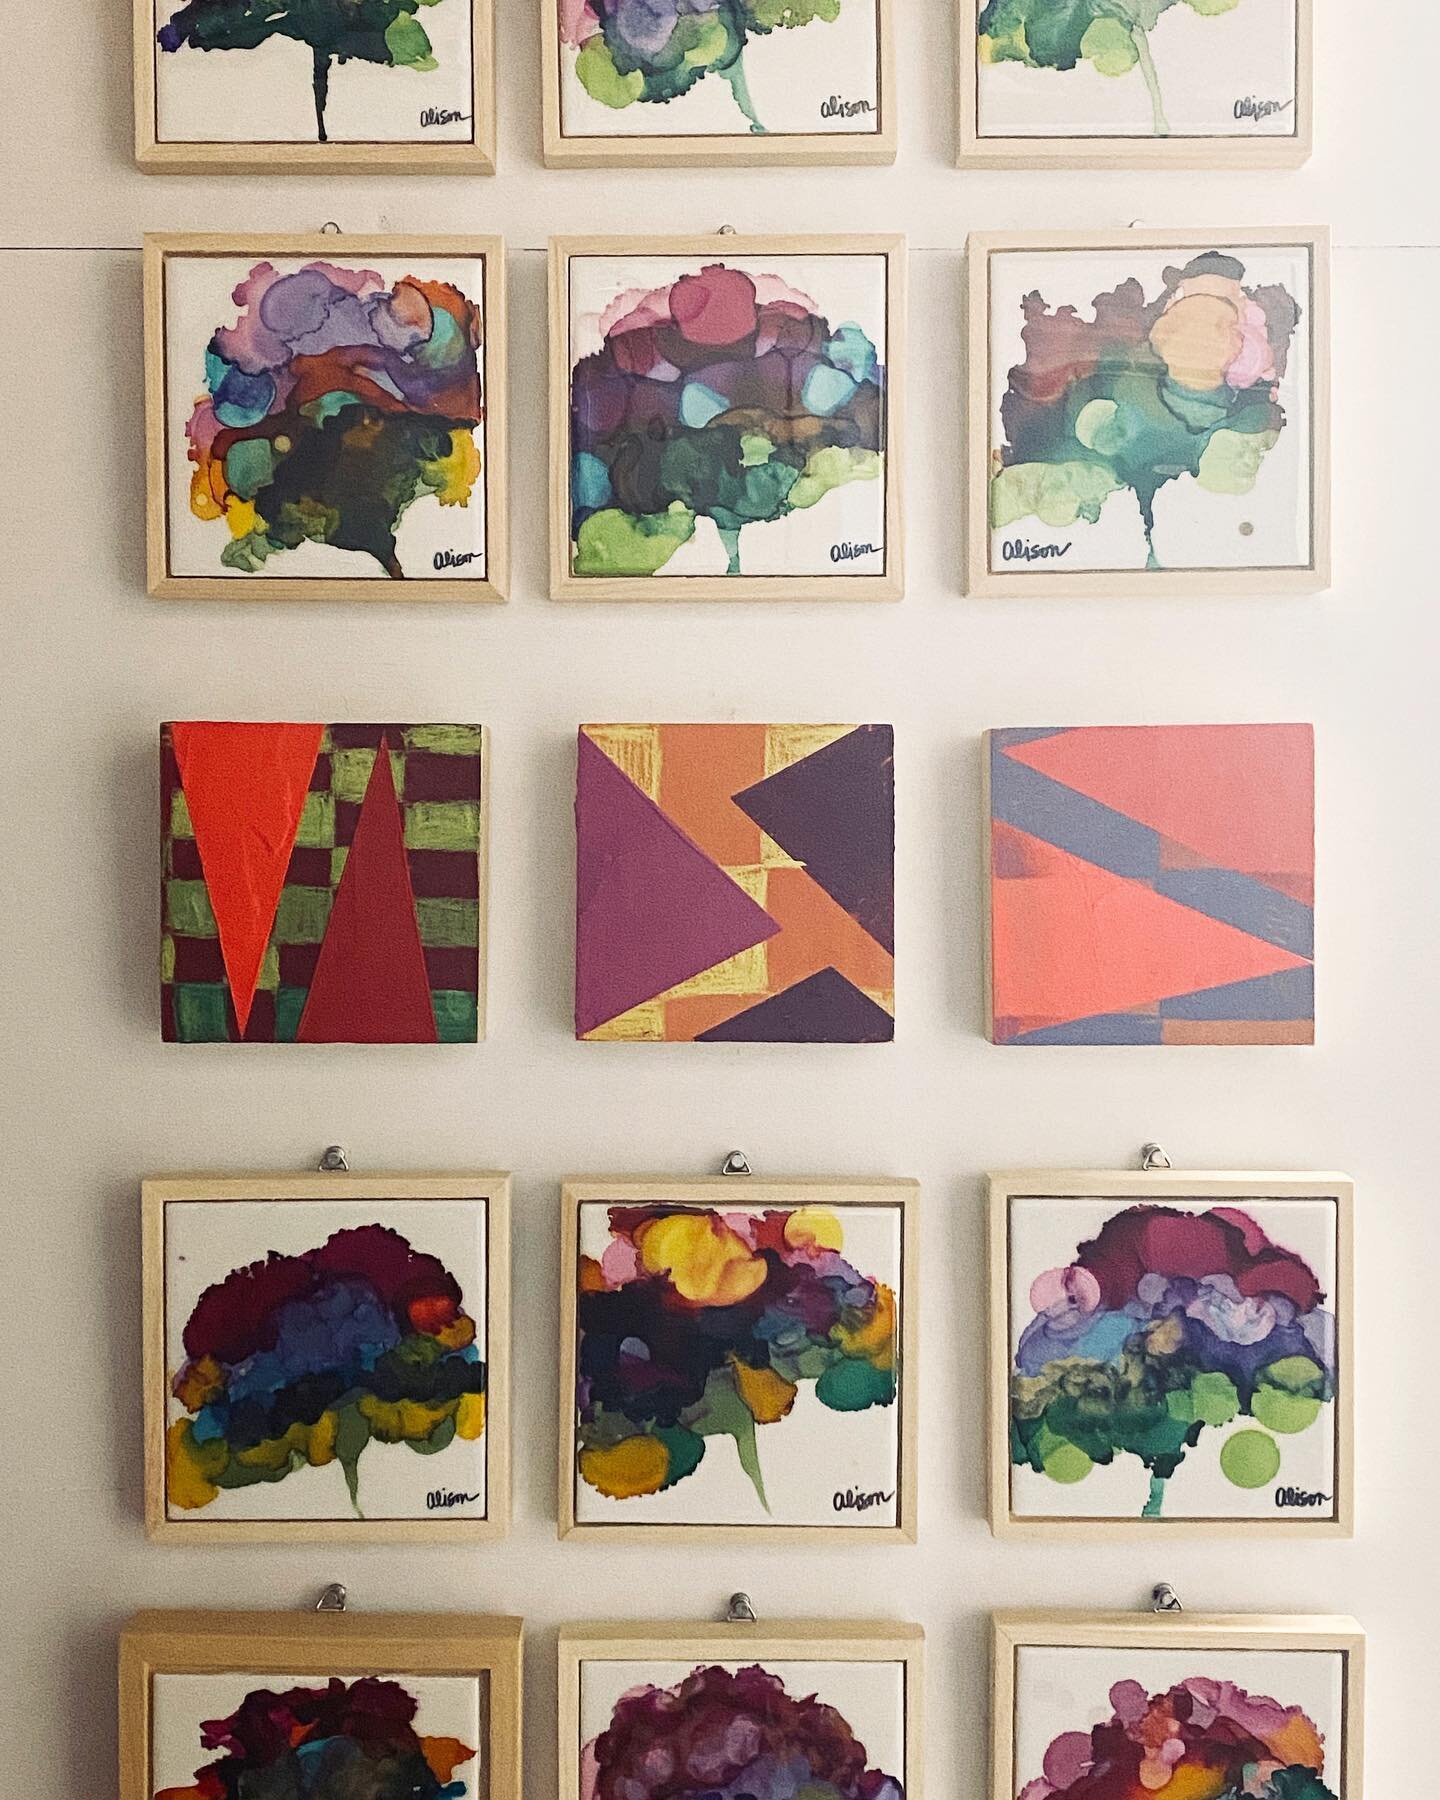 Come check out some new work at Somerville Open Studios this weekend 12-6pm.

@steven_cabral36 and I are at Vernon Street Studios, studio #103 (first floor near bathrooms).

Shown here: Ink Tiles with resin, framed, $85
Steven&rsquo;s work: Mixed med